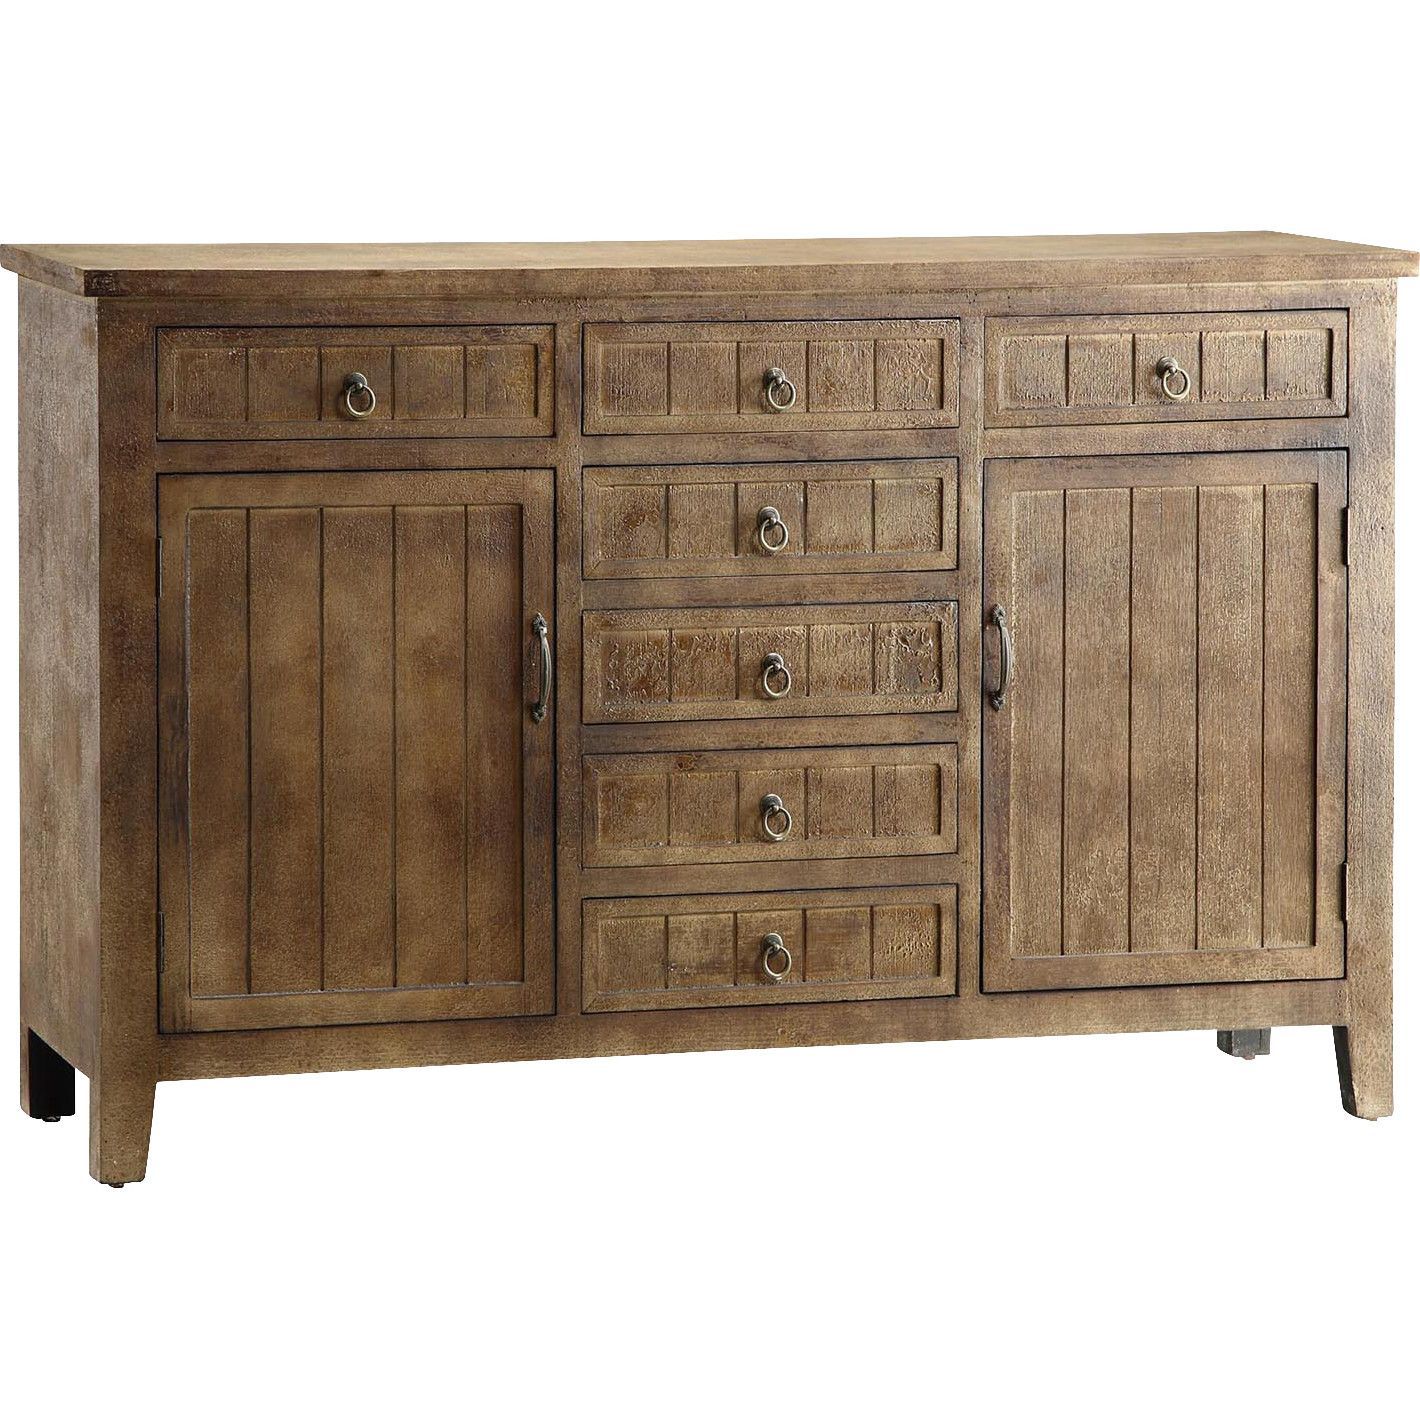 Crestview Collection Cheyenne Sideboard | Pollard For Best And Newest Drummond 4 Drawer Sideboards (View 10 of 20)